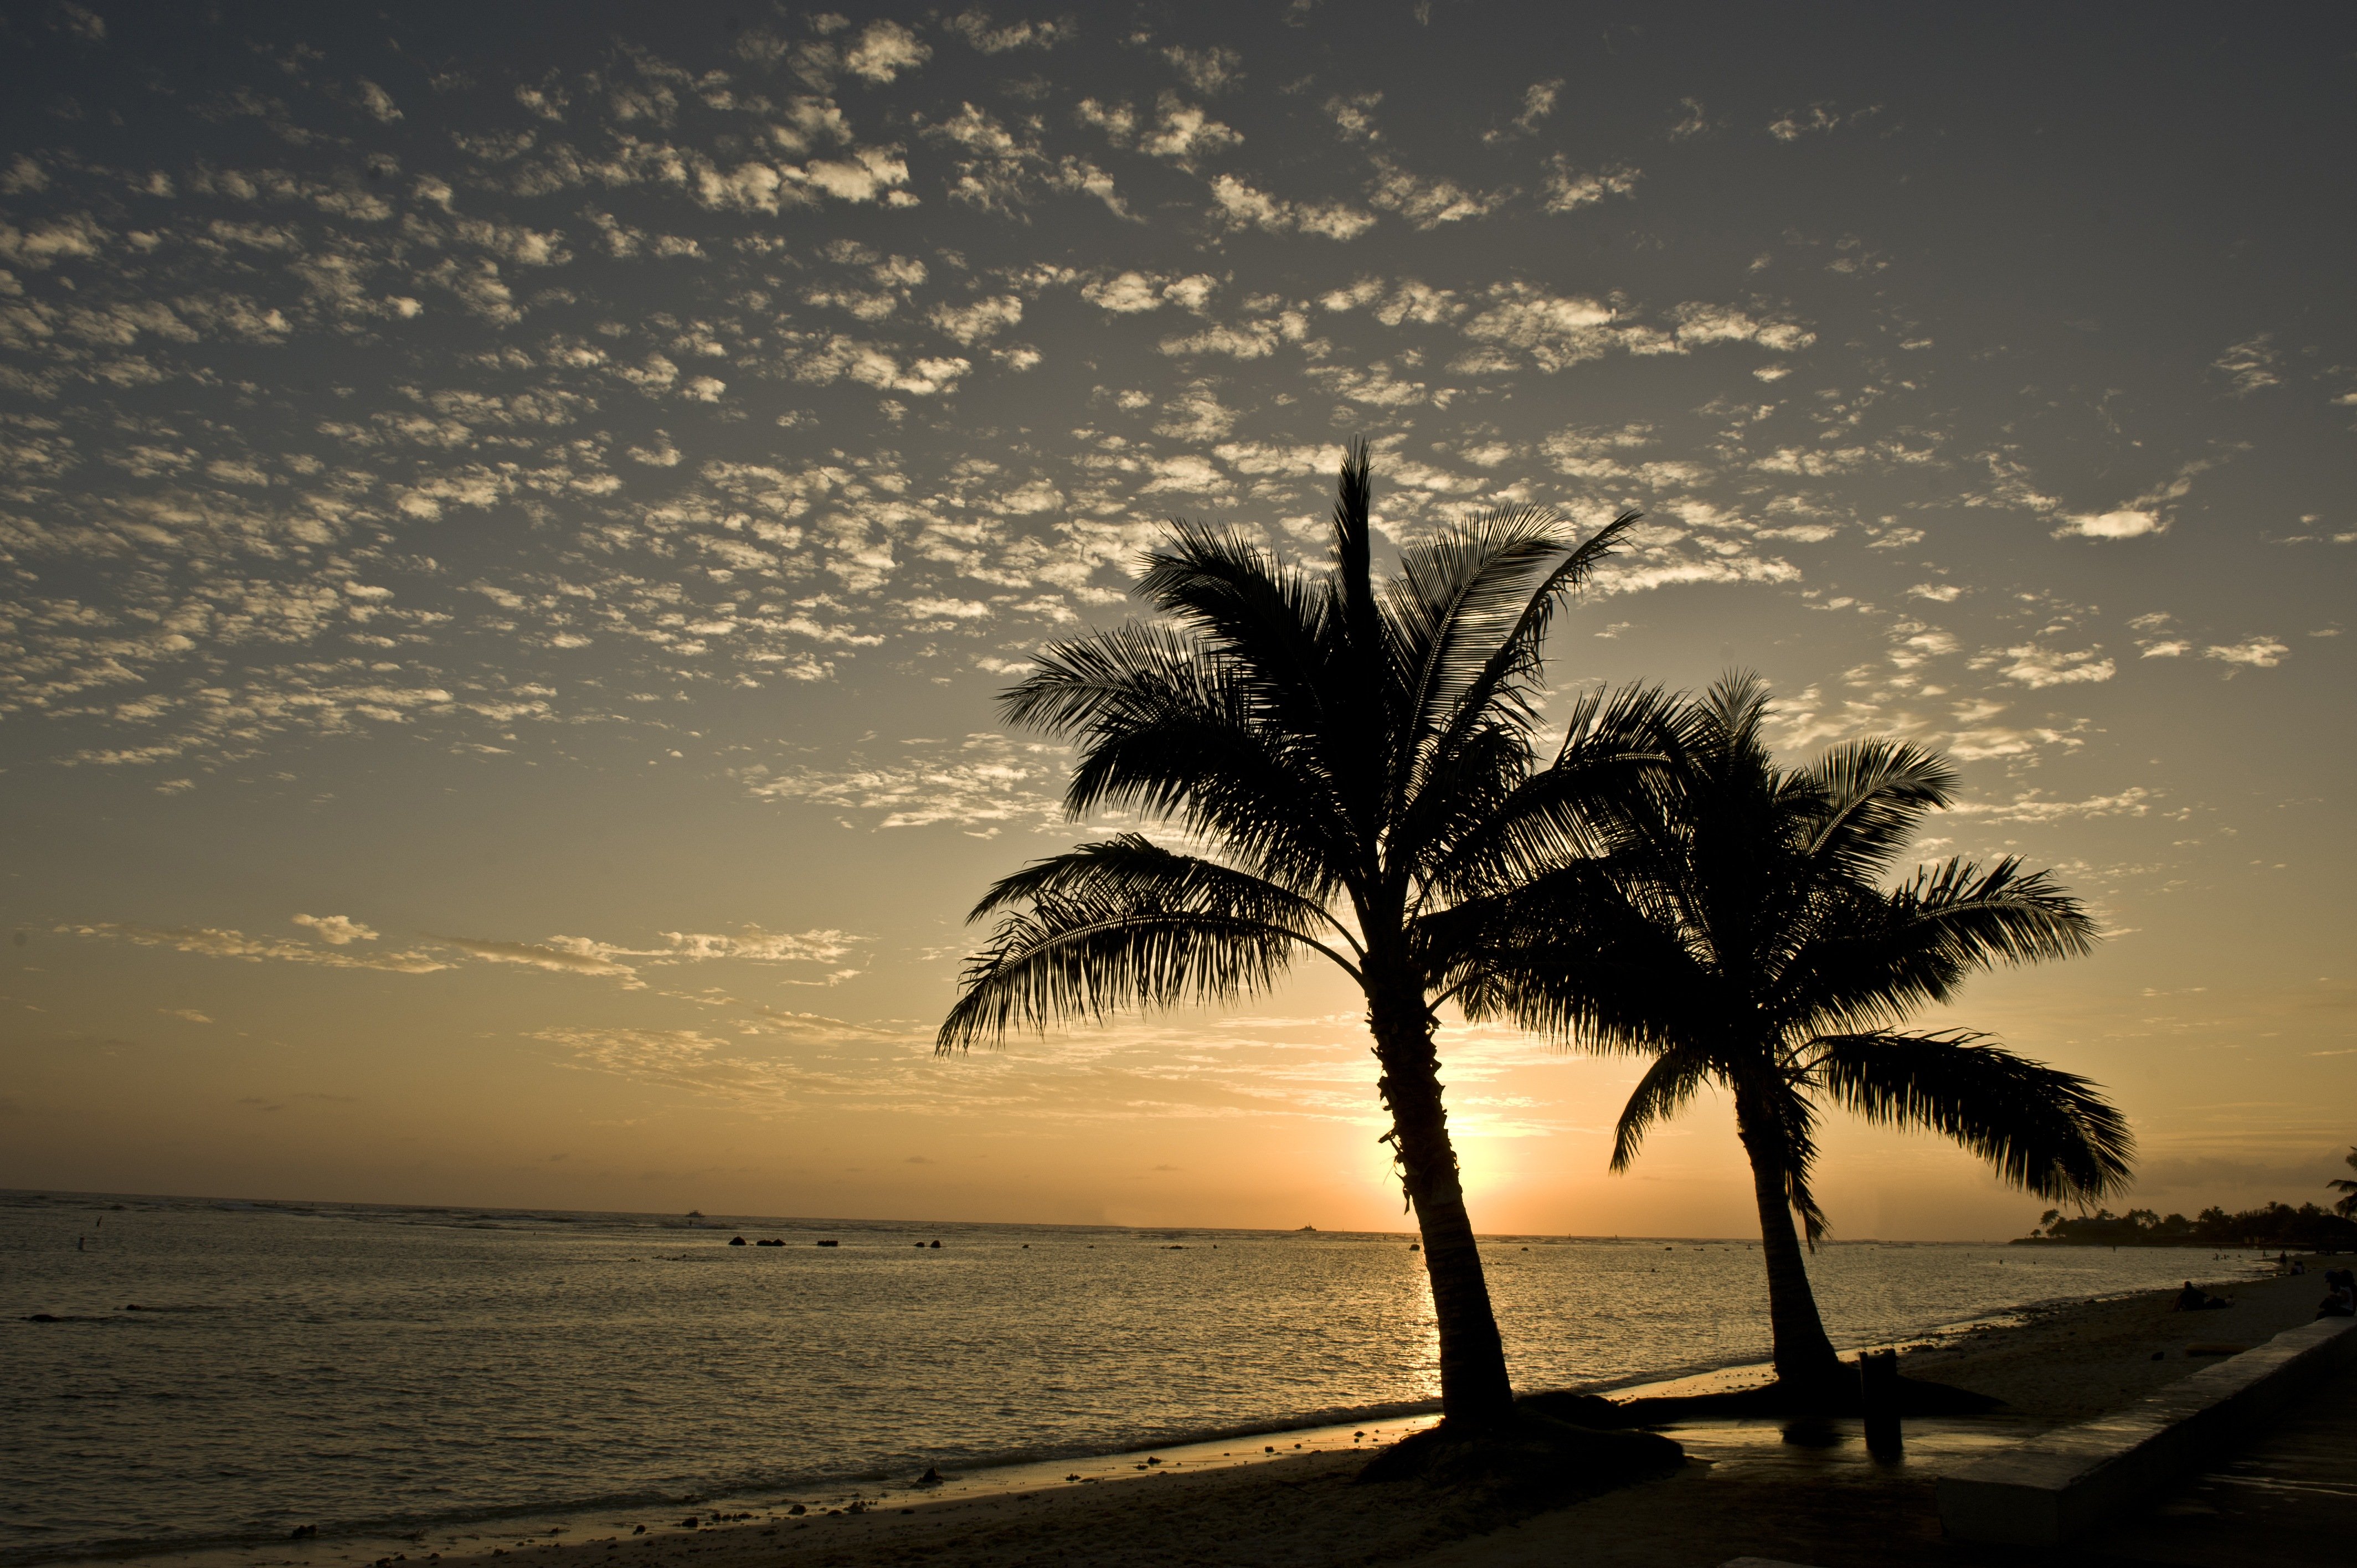 Palm trees at a secluded beach at sunset